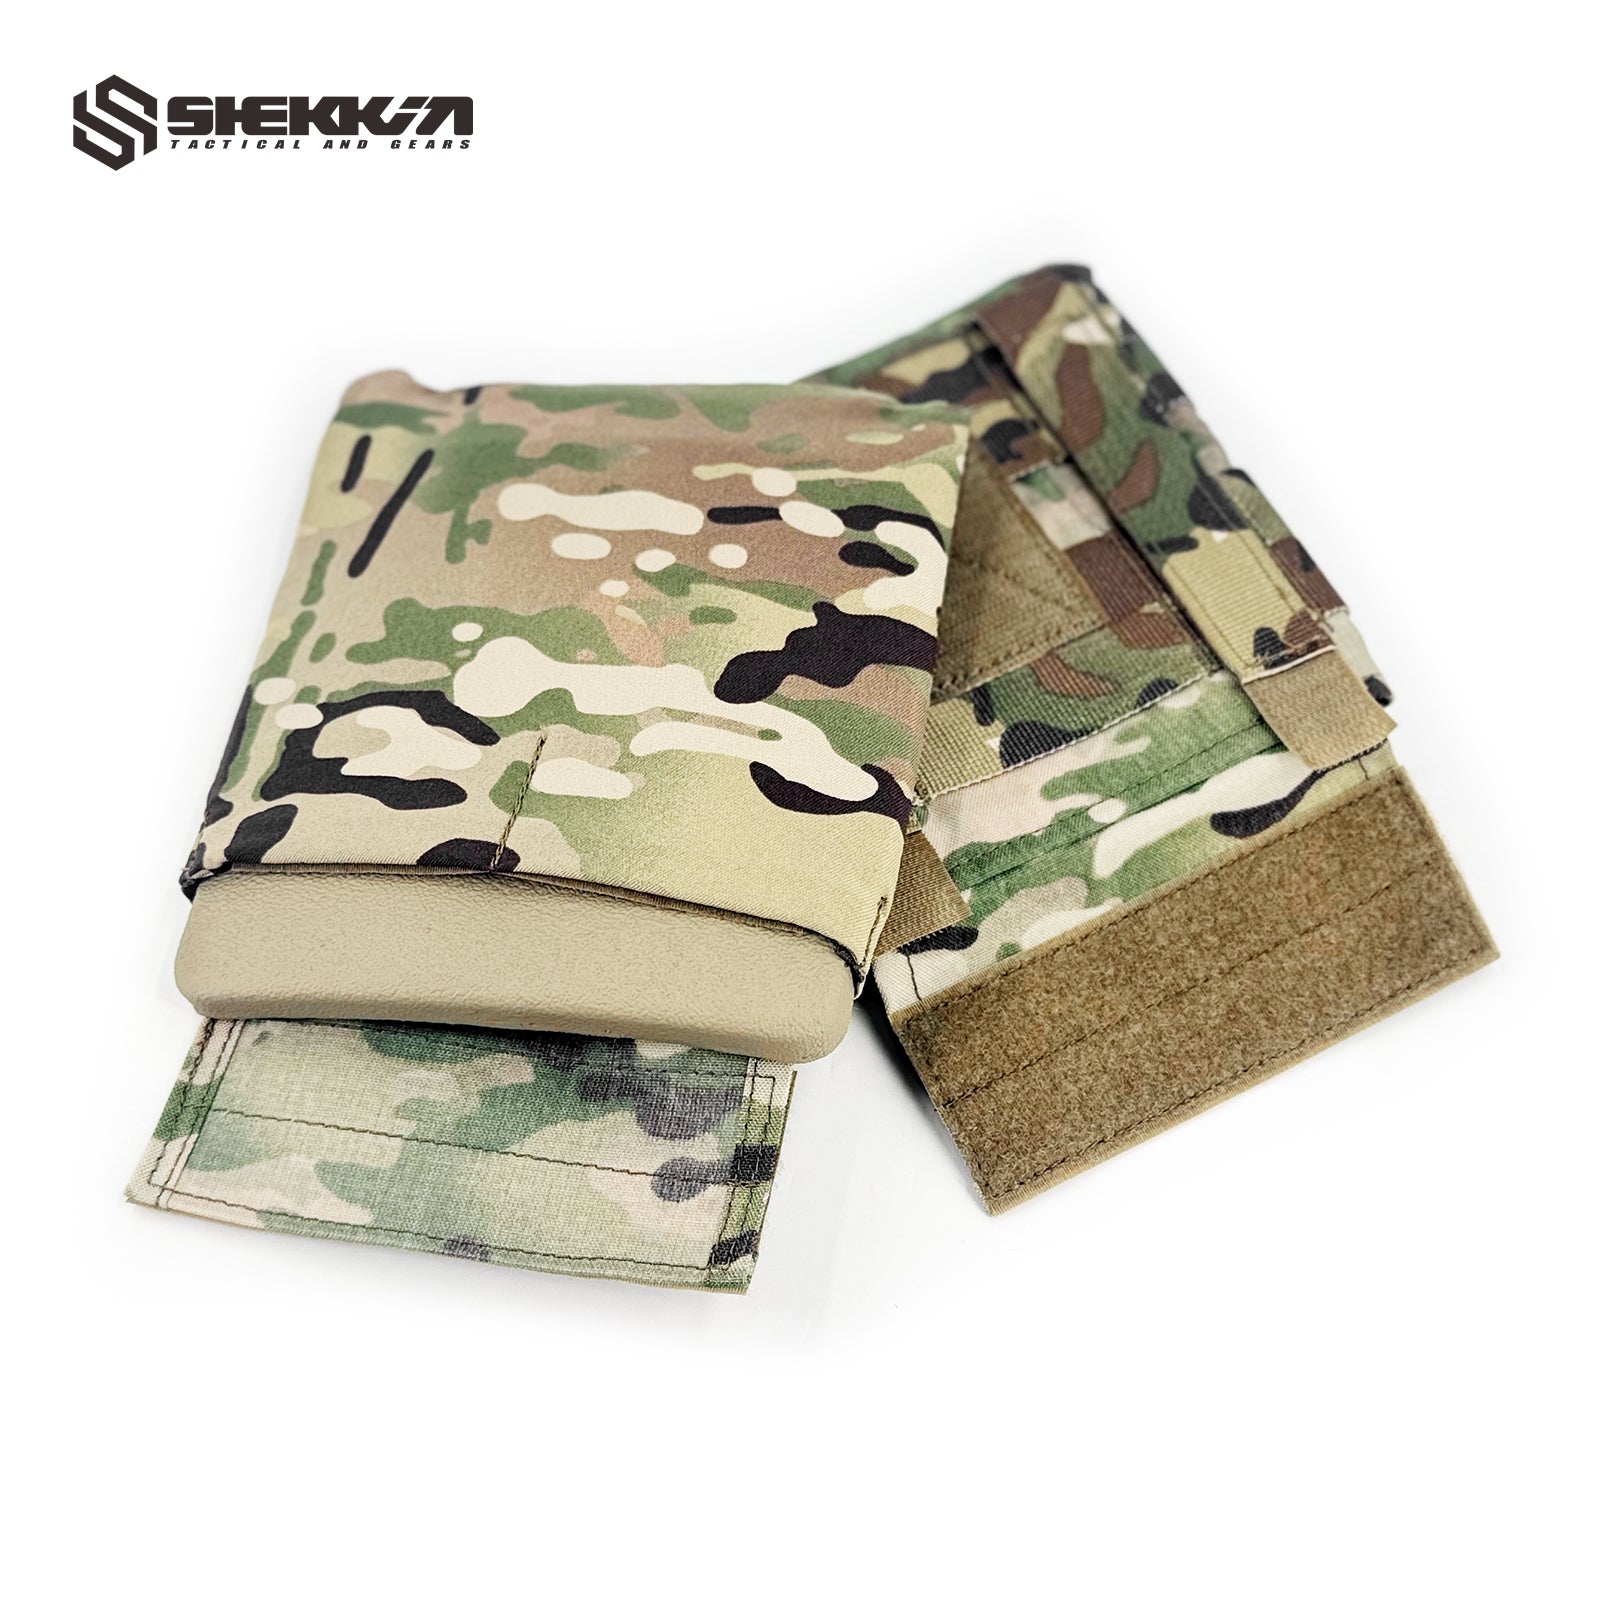 Crye Style 6x6 Side Plate Pouch Set